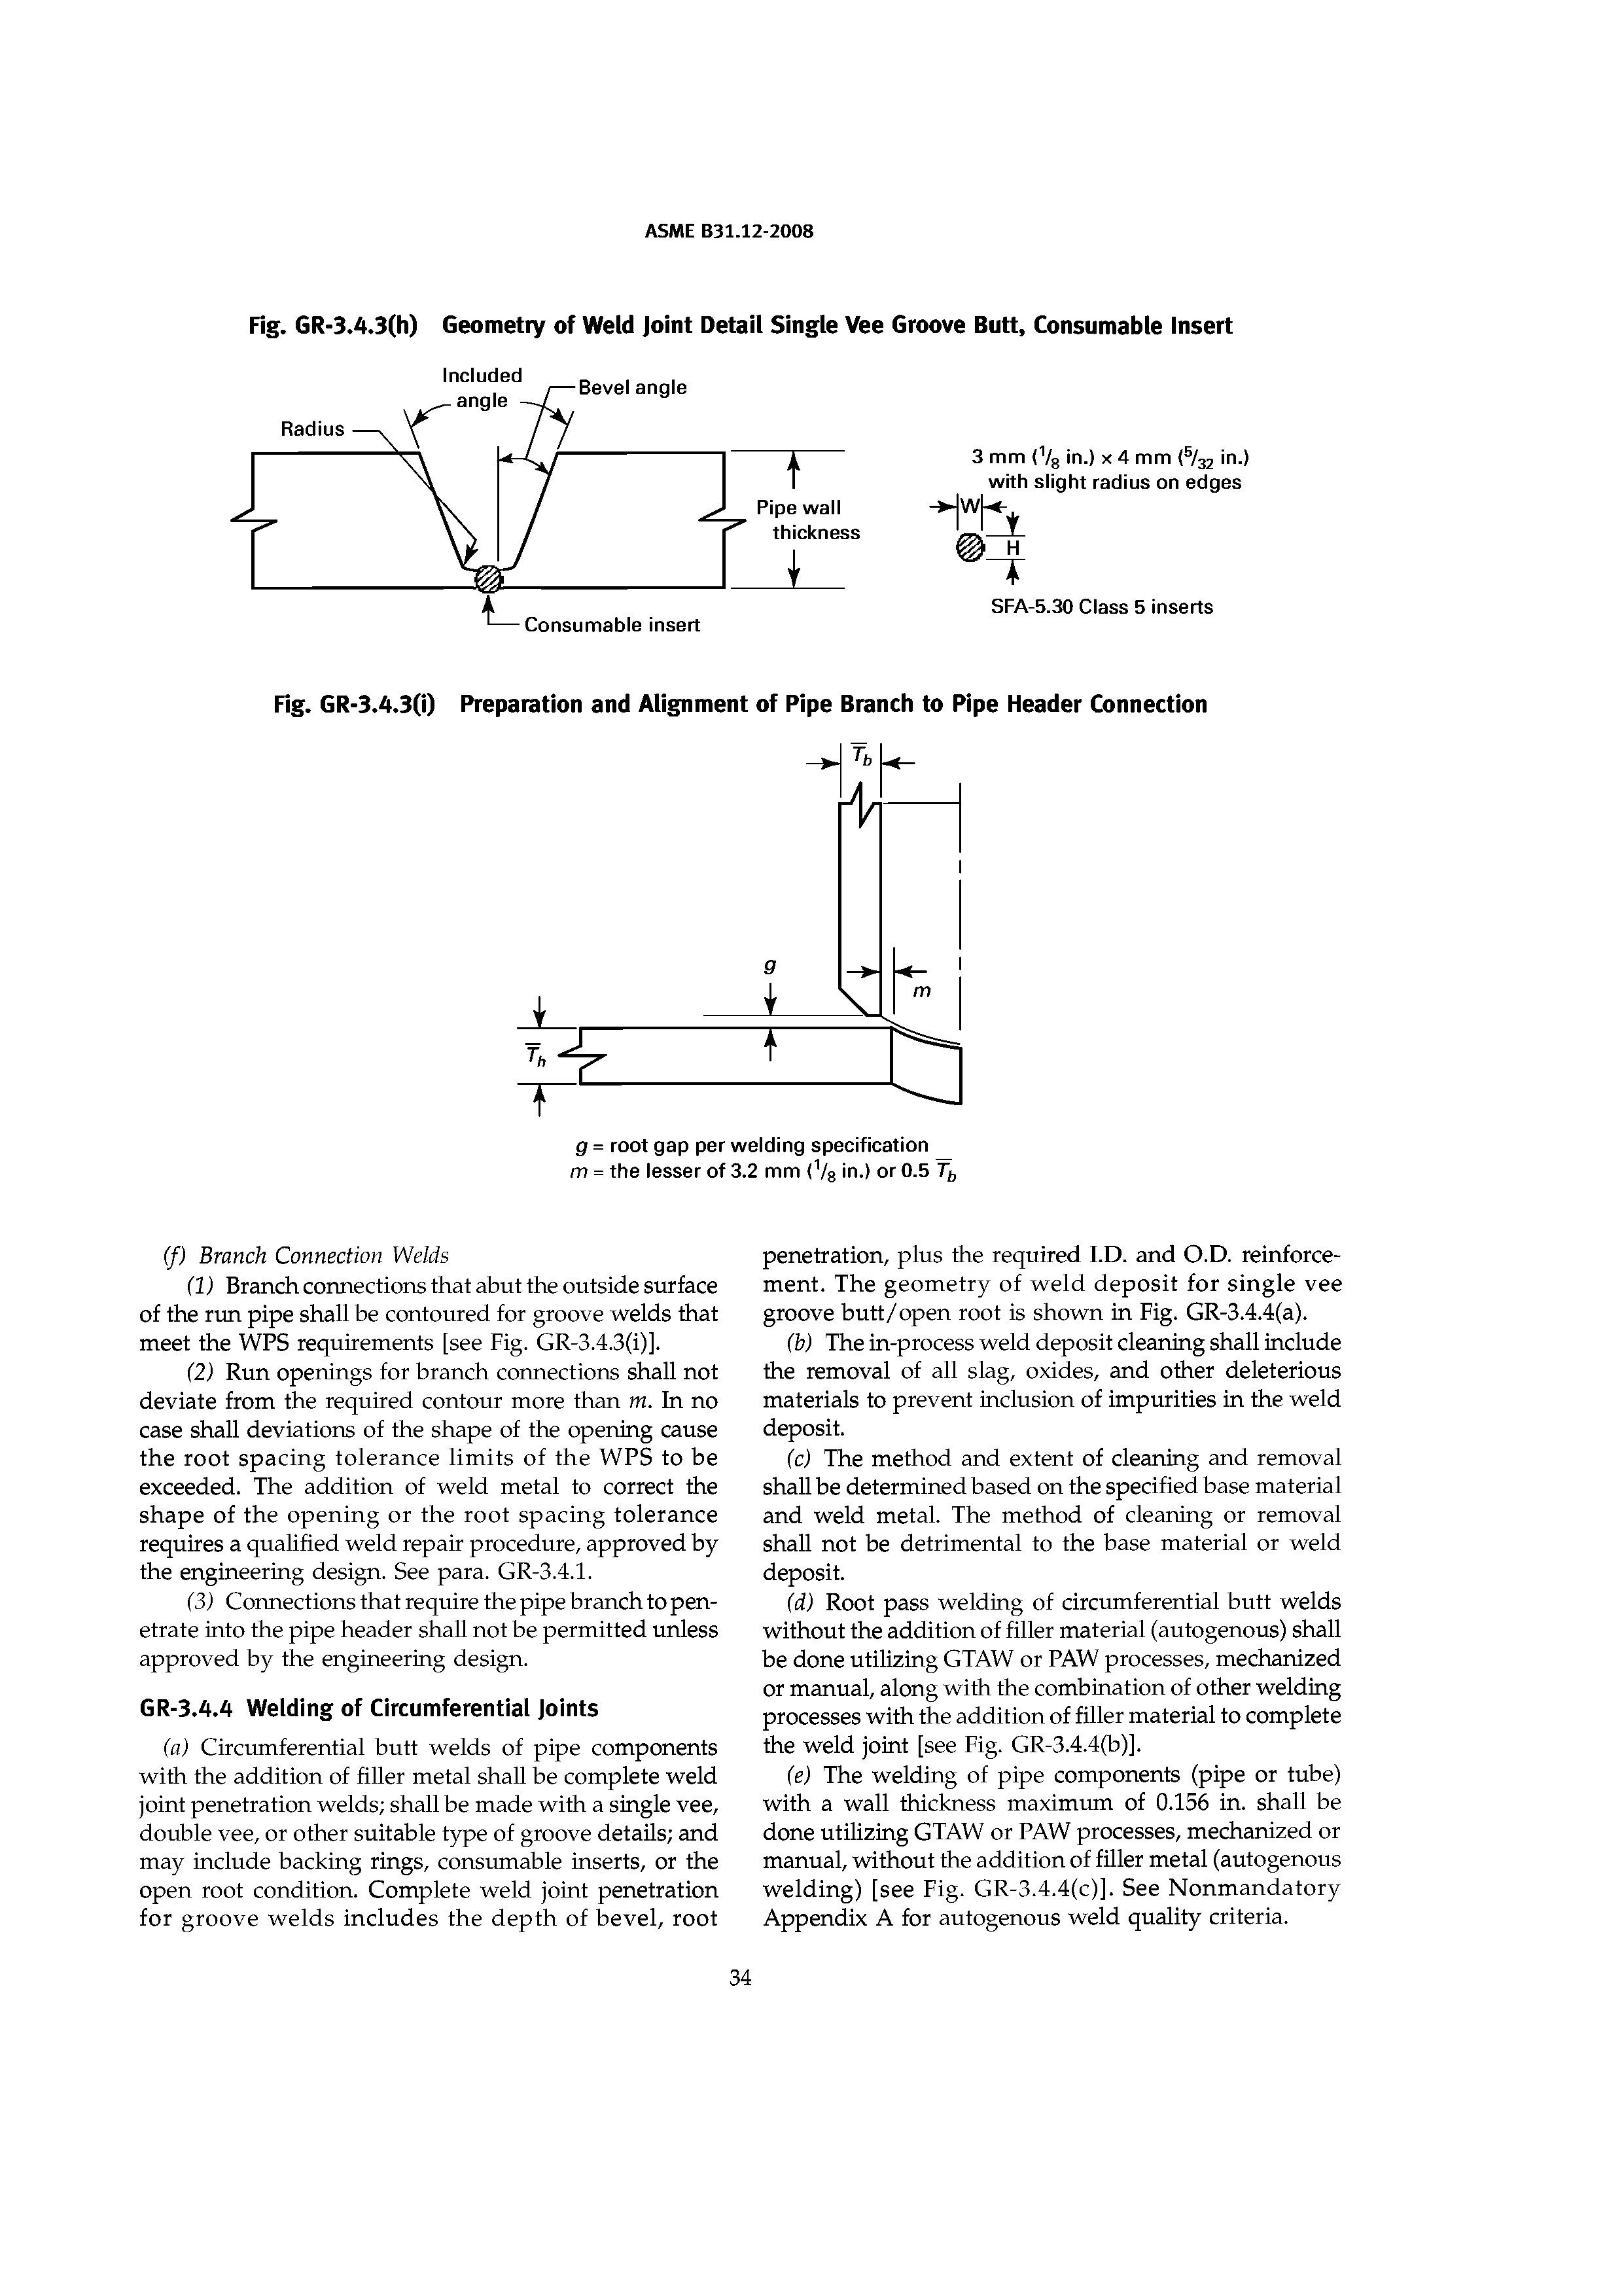 Fig. GR-3.4.3(i) Preparation and Alignment of Pipe Branch to Pipe Header Connection...